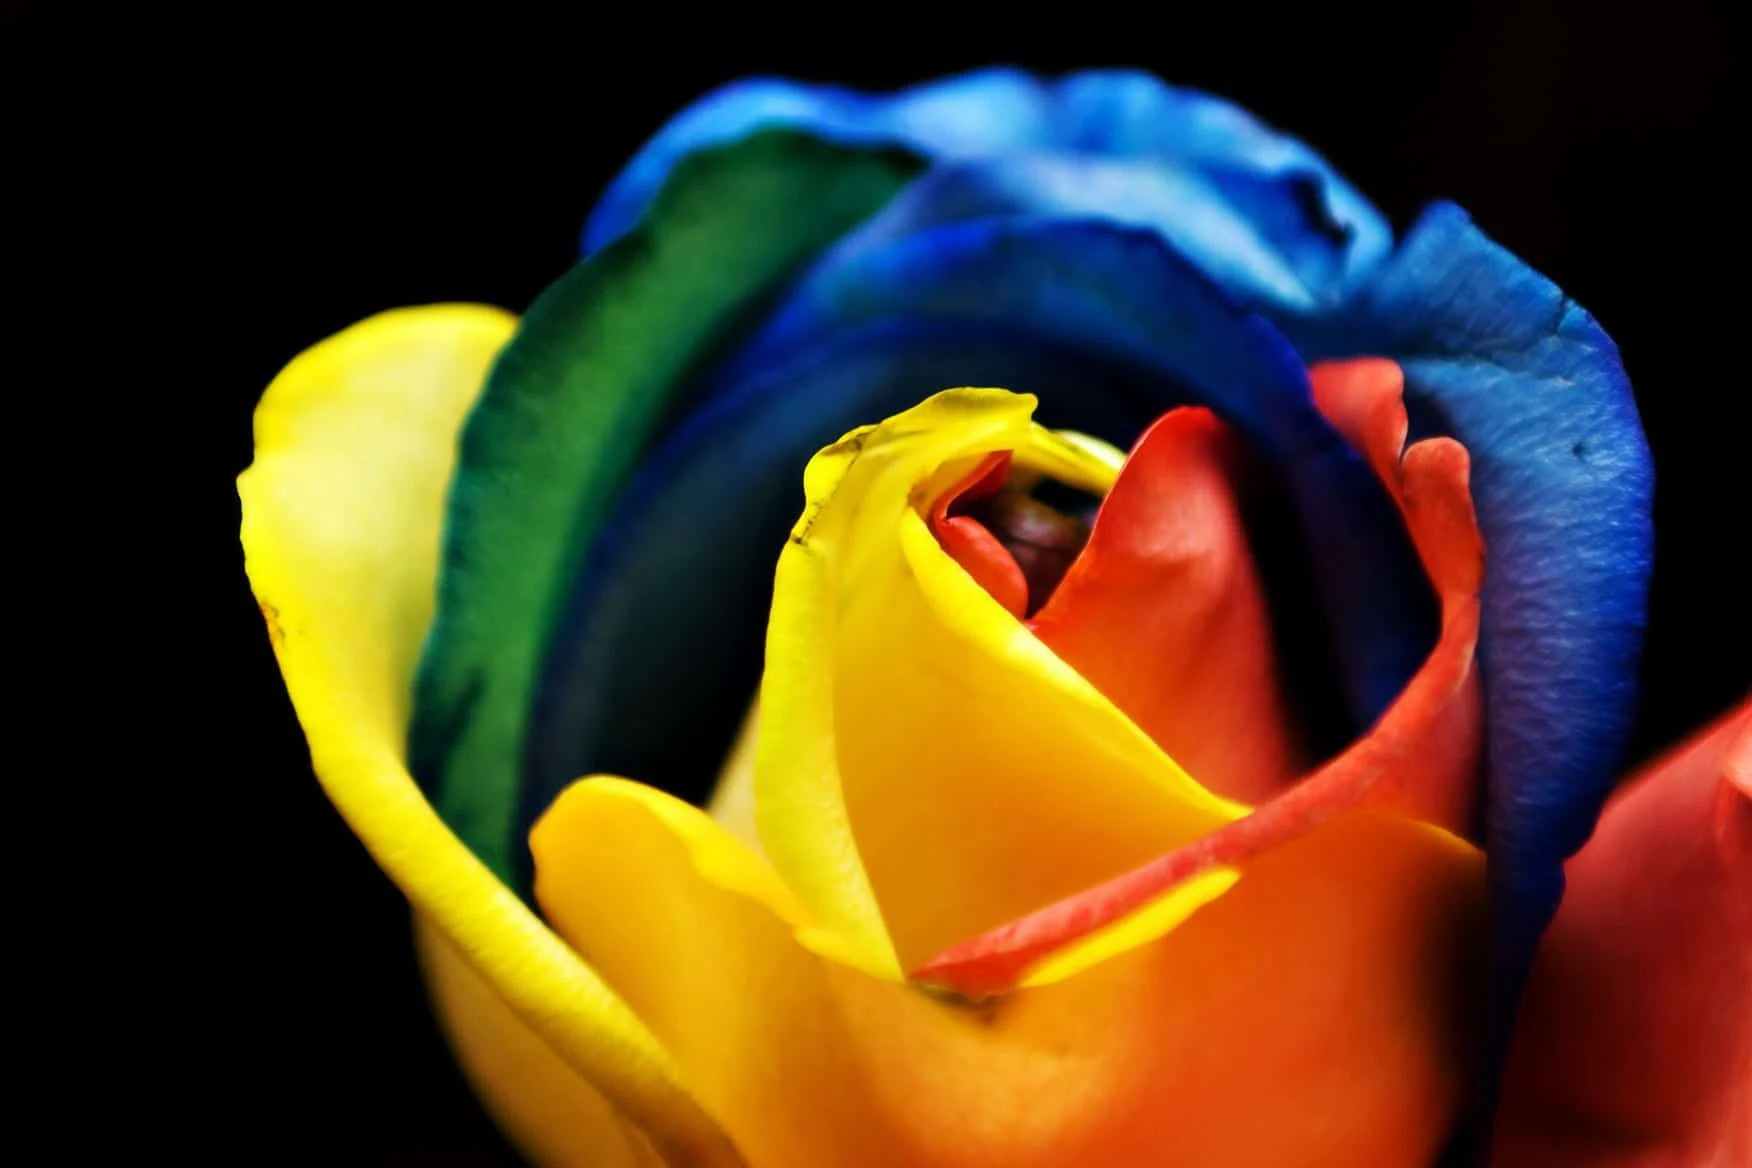 Picture of rainbow rose flower - Pictures of 20 colored roses - Pictures of 20 colored roses - NeotericIT.com